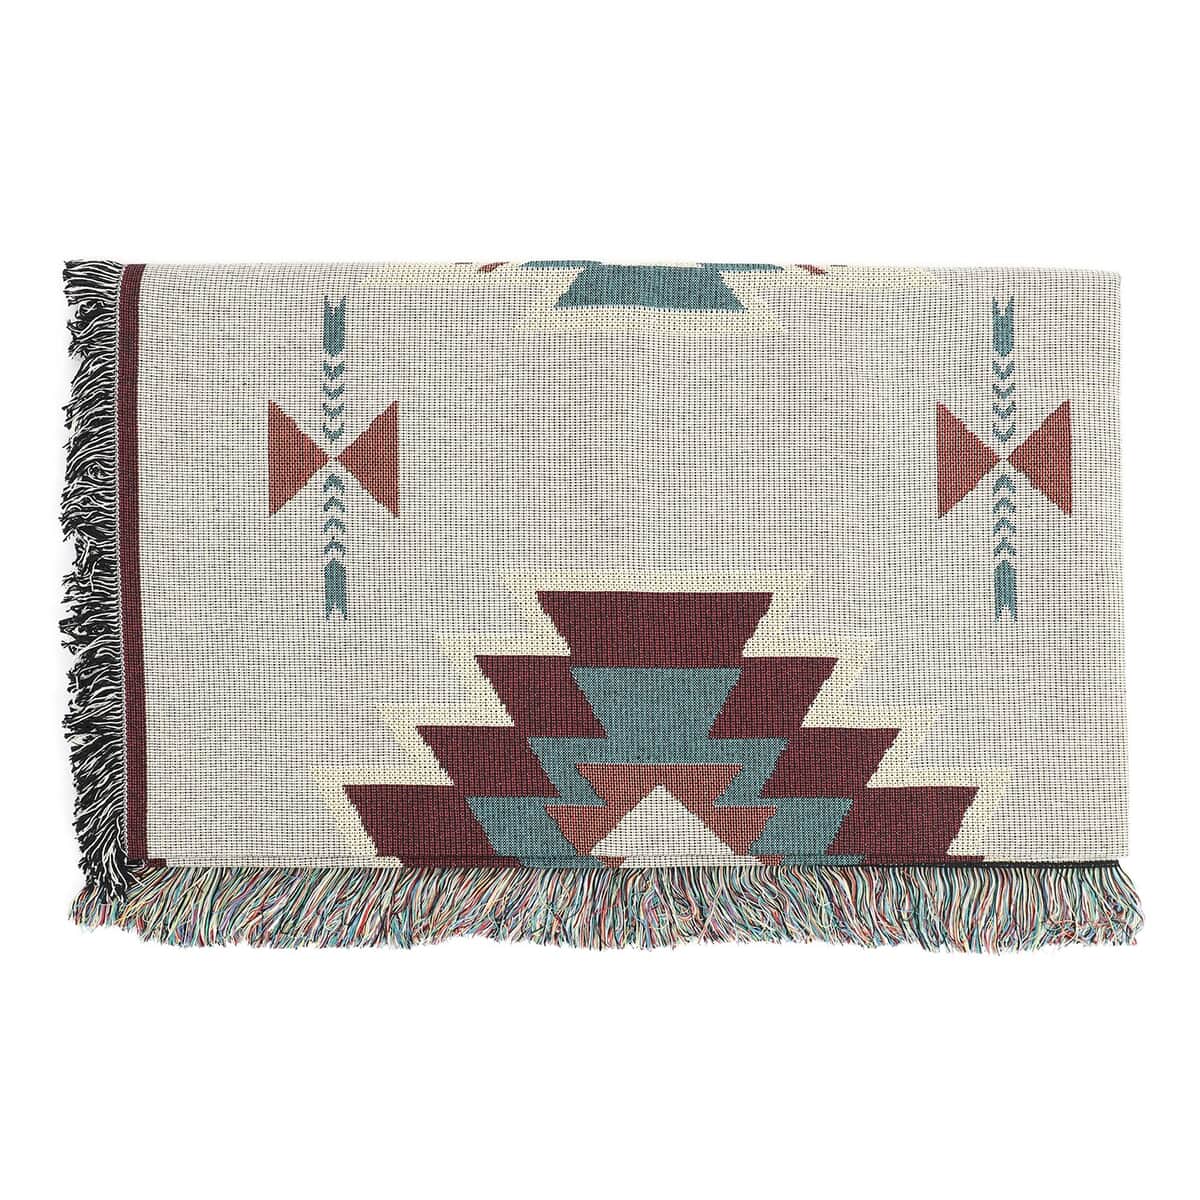 Ivory & Red Jacquard Santa Fe Woven Printed Cotton Throw with Fringes 1.65lbs | Cotton Throw Blanket | Soft Blanket image number 3